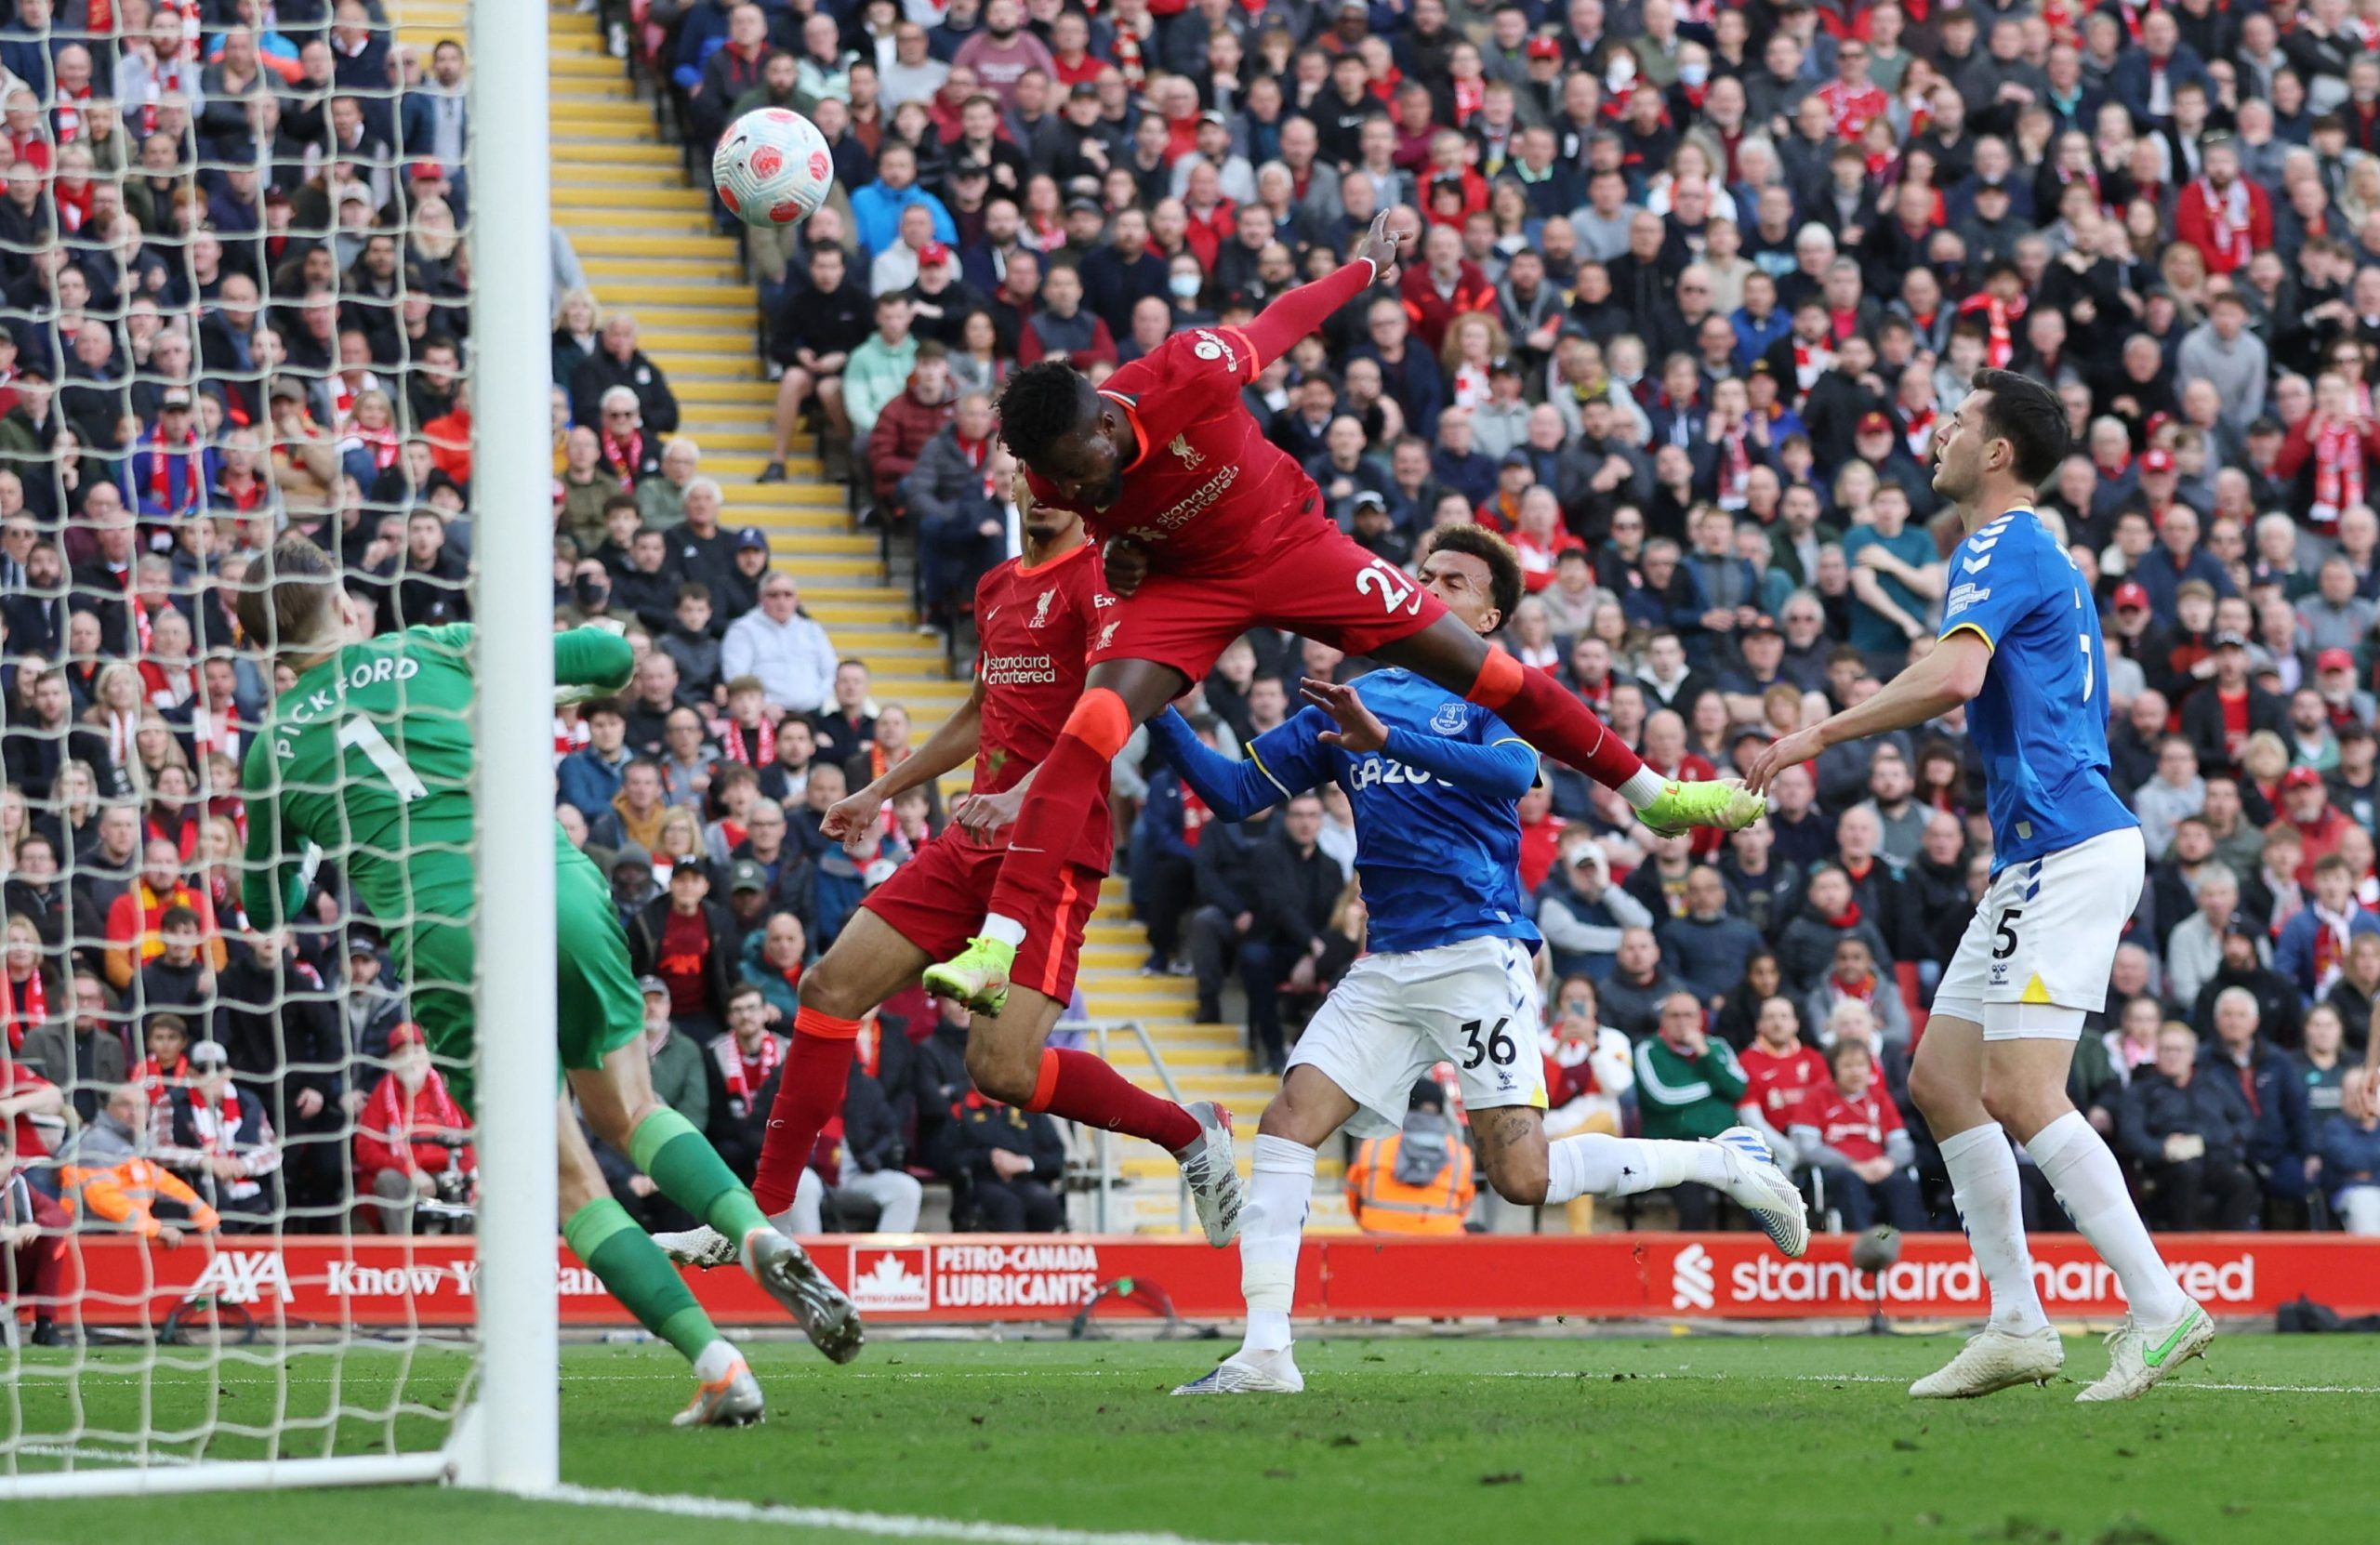 Soccer Football - Premier League - Liverpool v Everton - Anfield, Liverpool, Britain - April 24, 2022  Liverpool's Divock Origi scores their second goal REUTERS/Phil Noble EDITORIAL USE ONLY. No use with unauthorized audio, video, data, fixture lists, club/league logos or 'live' services. Online in-match use limited to 75 images, no video emulation. No use in betting, games or single club /league/player publications.  Please contact your account representative for further details.